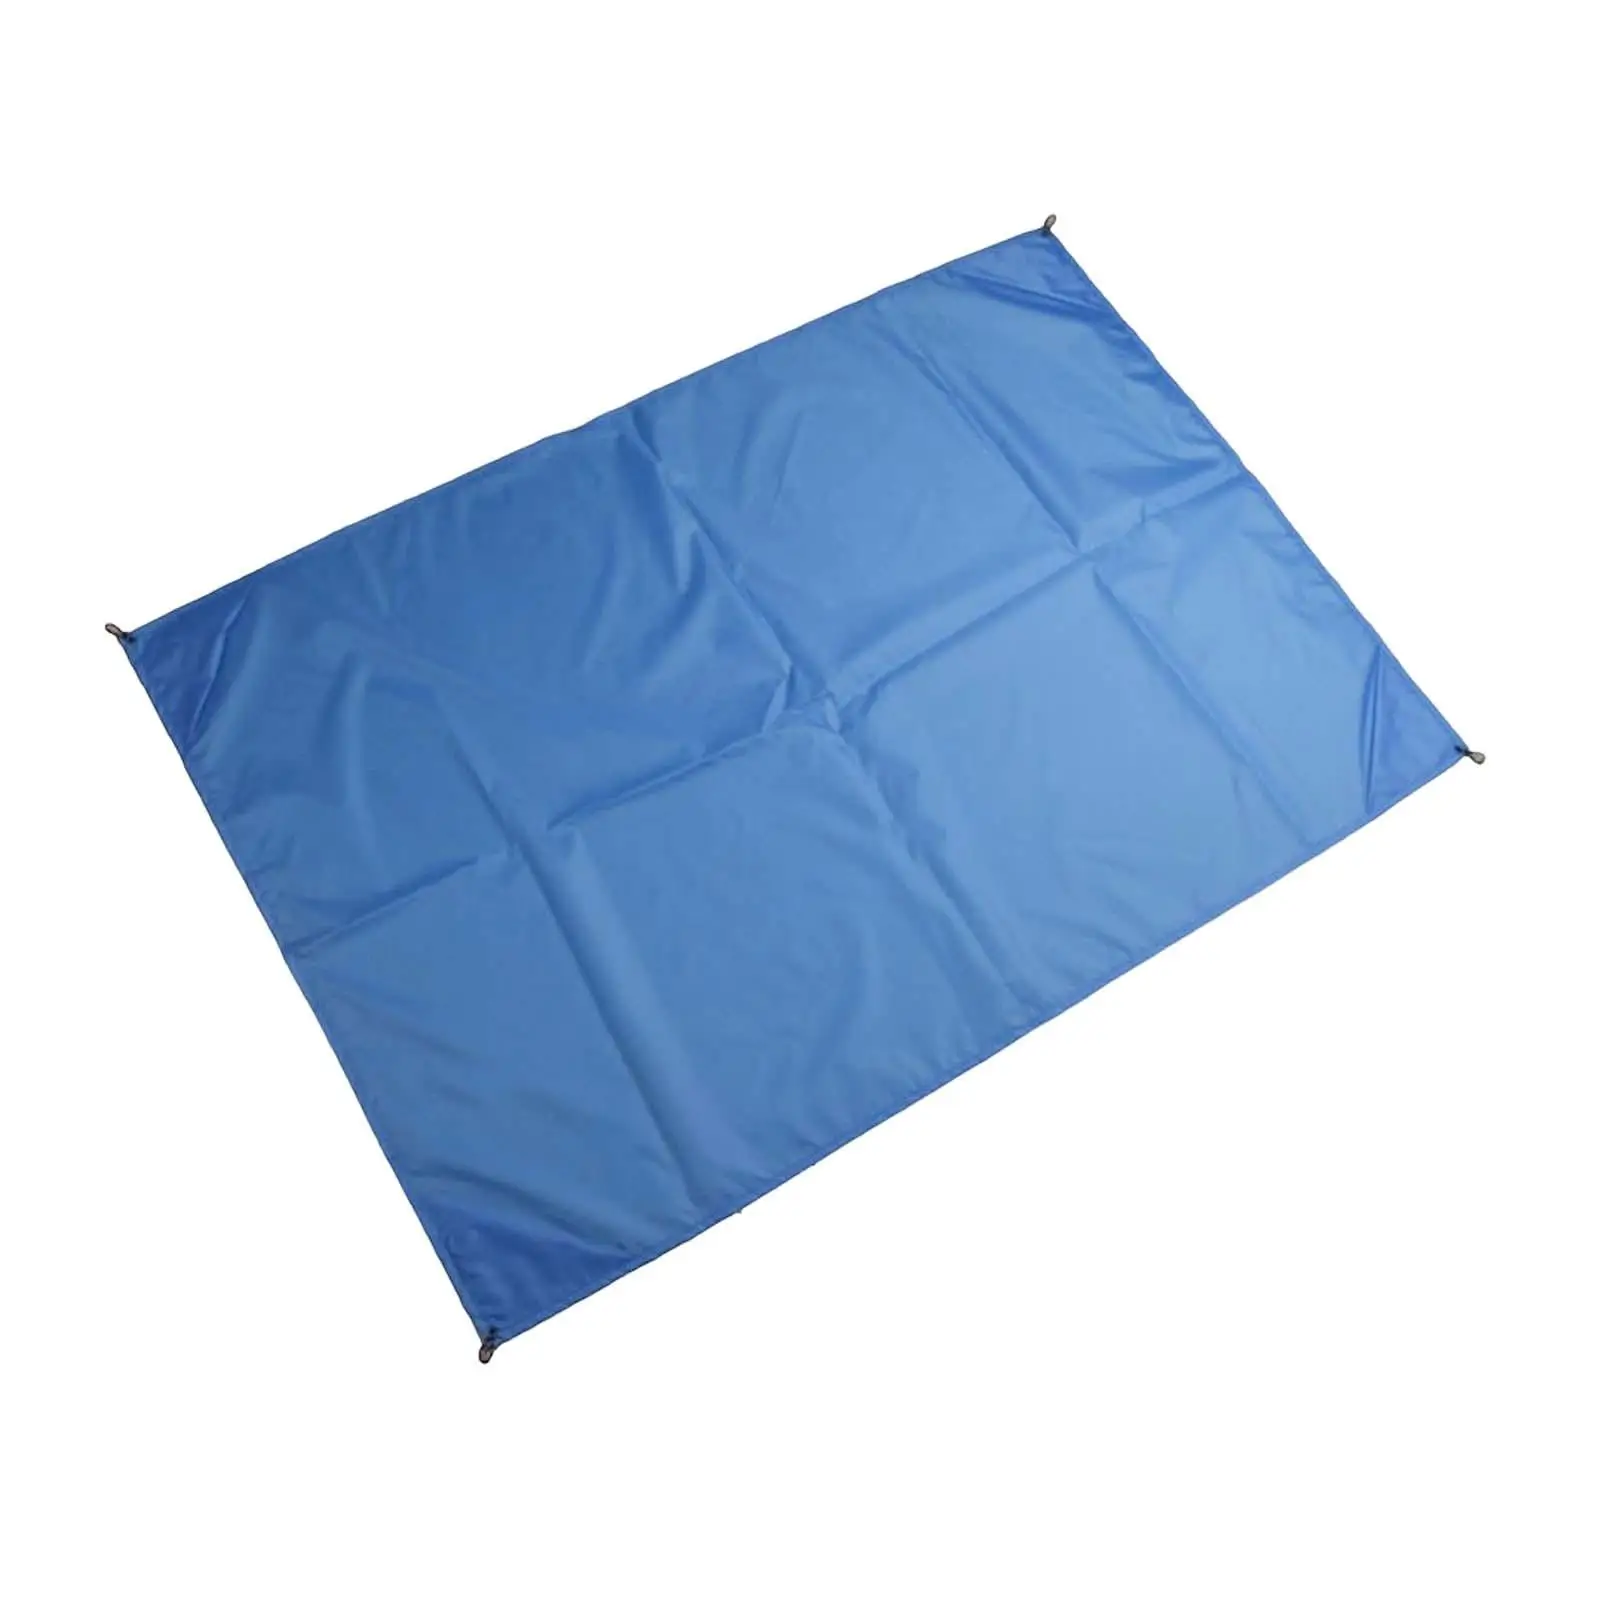 Foldable Pocket Blanket for Beach Travel Outdoor Camping Hiking Picnic Festival Sports Water Resistant Compact Blanket